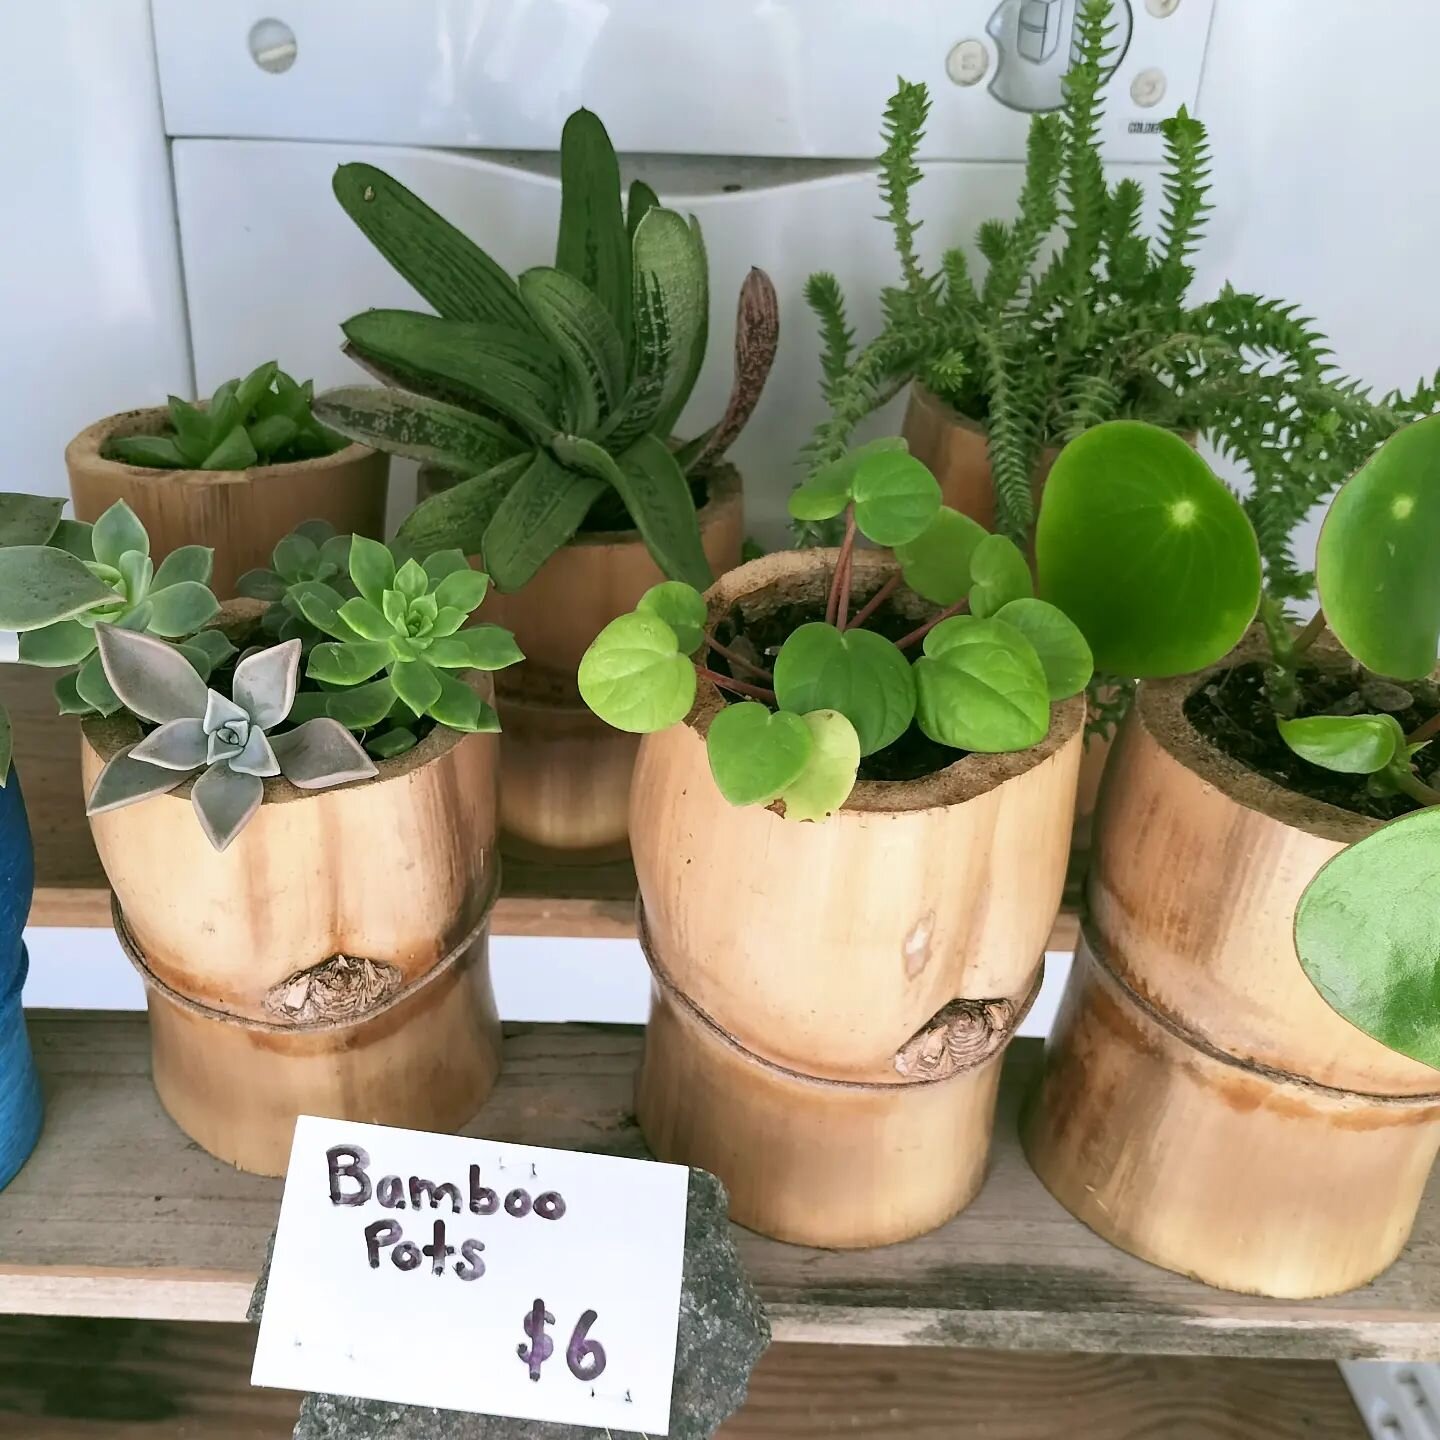 Lots of $6 plants added to the stall for last minute gift ideas 🎄

If you want something kept aside for you until closer to Christmas to avoid it being found or potential black thumbs, let me know! 

#buylocalimbil #seqldhonestystall #imbil #giftide